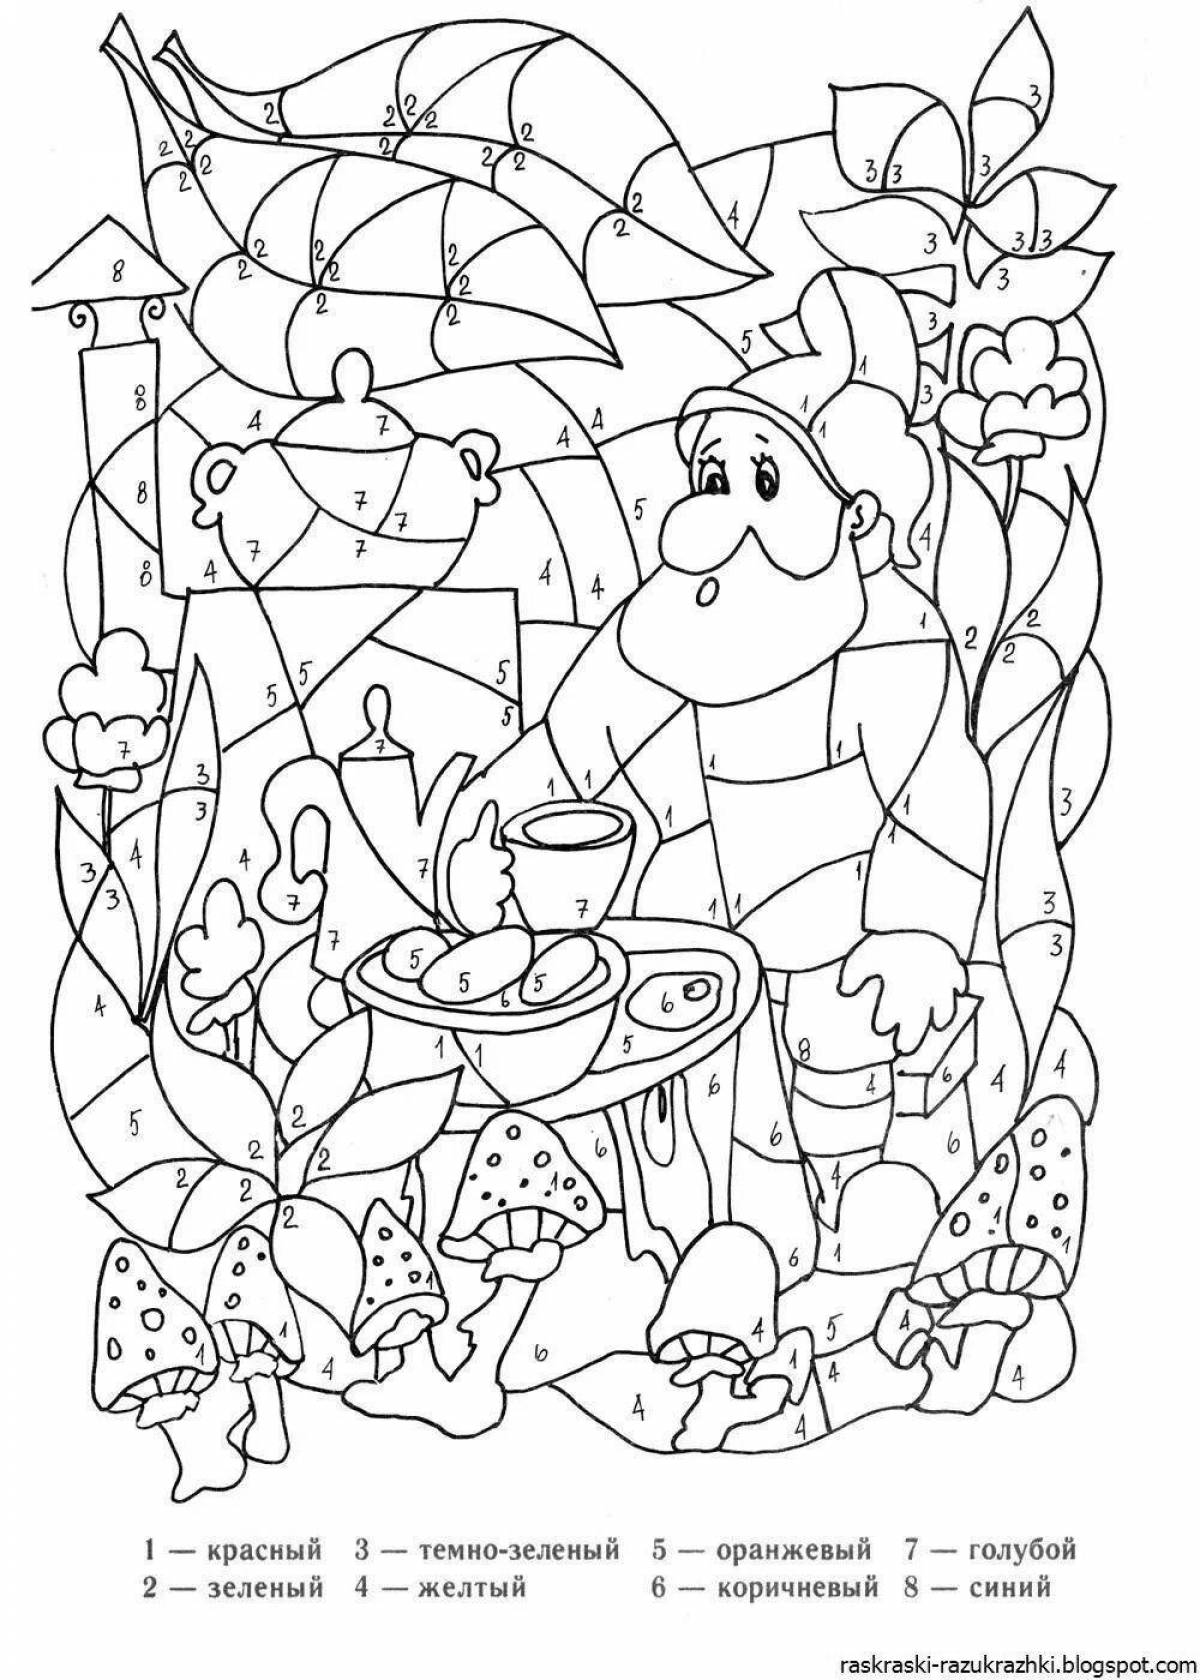 Colorful fairy tale coloring by numbers